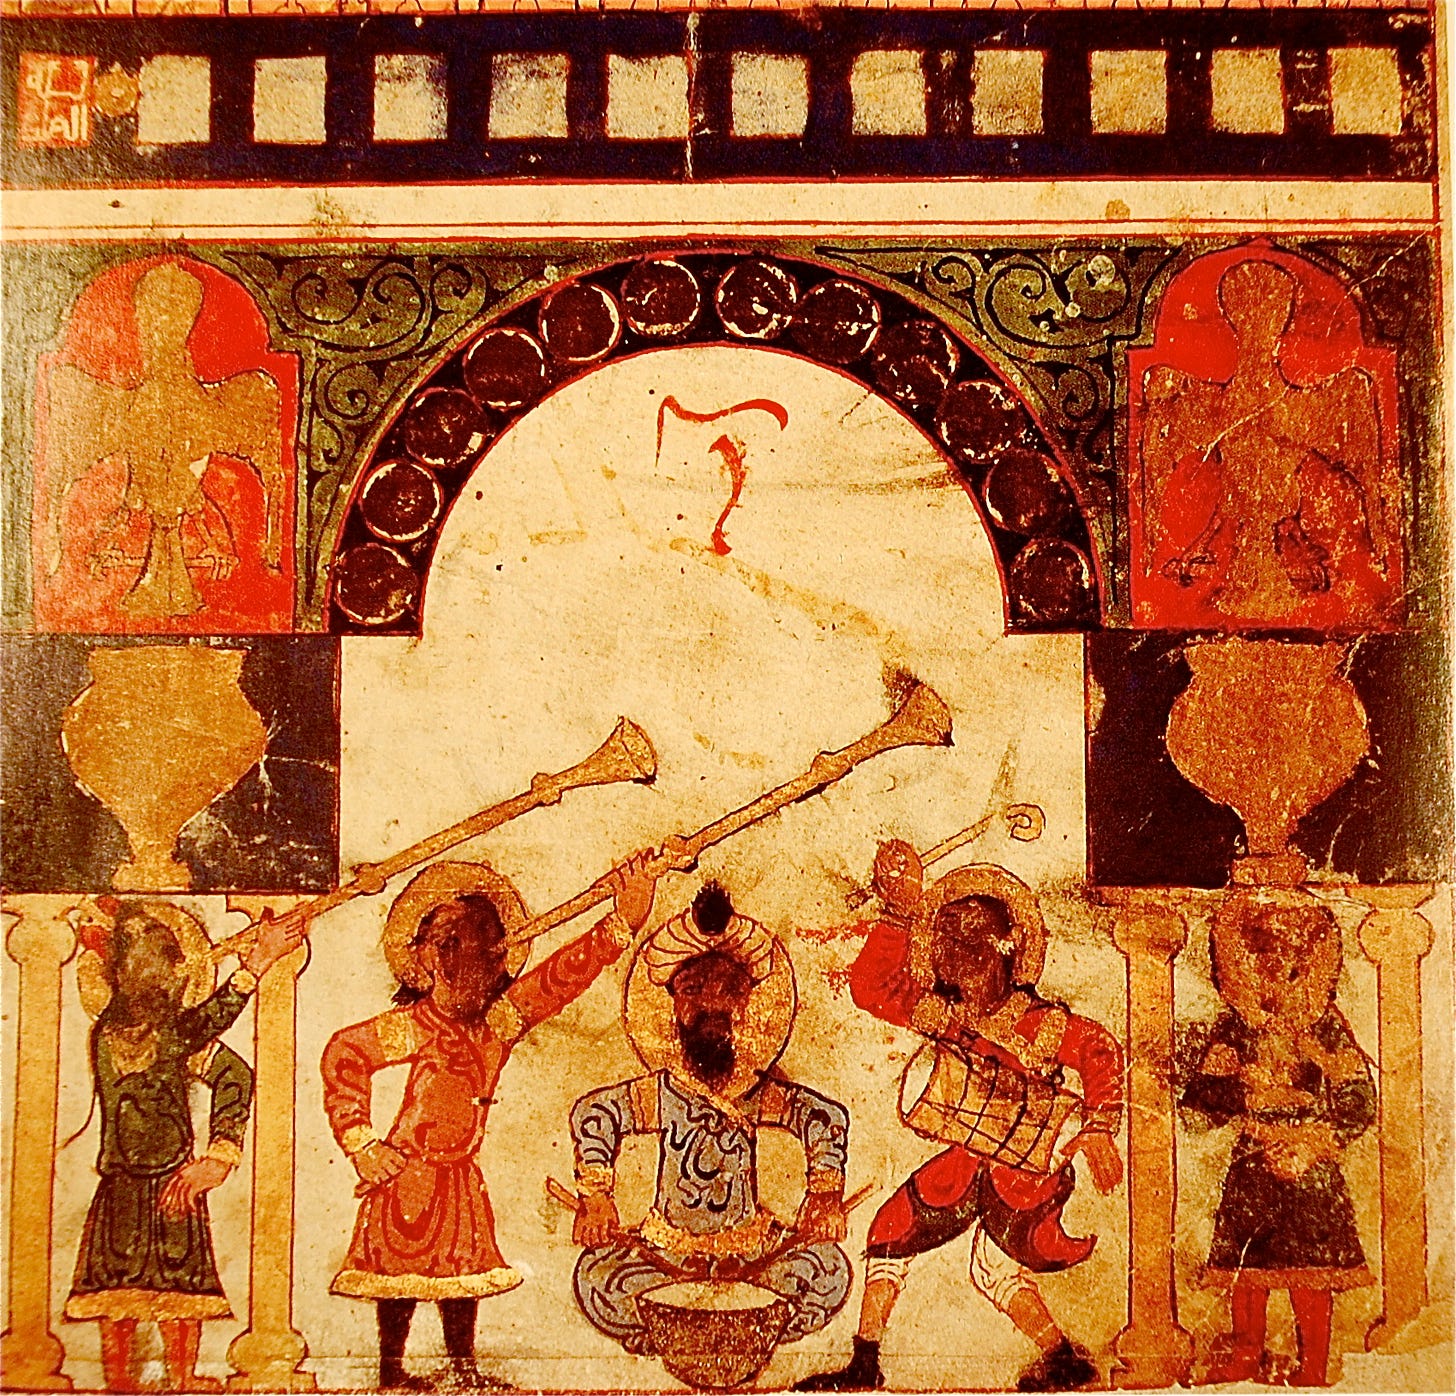 It is an old Indian frieze. The colours are different spectras of orange, brown, beige and gold. It is an old water clock that depicts men in turbans playing cornets and trumpets, whilst a man in the middle plays a type of drum. The background is ornate decoration with an arc in the centre.